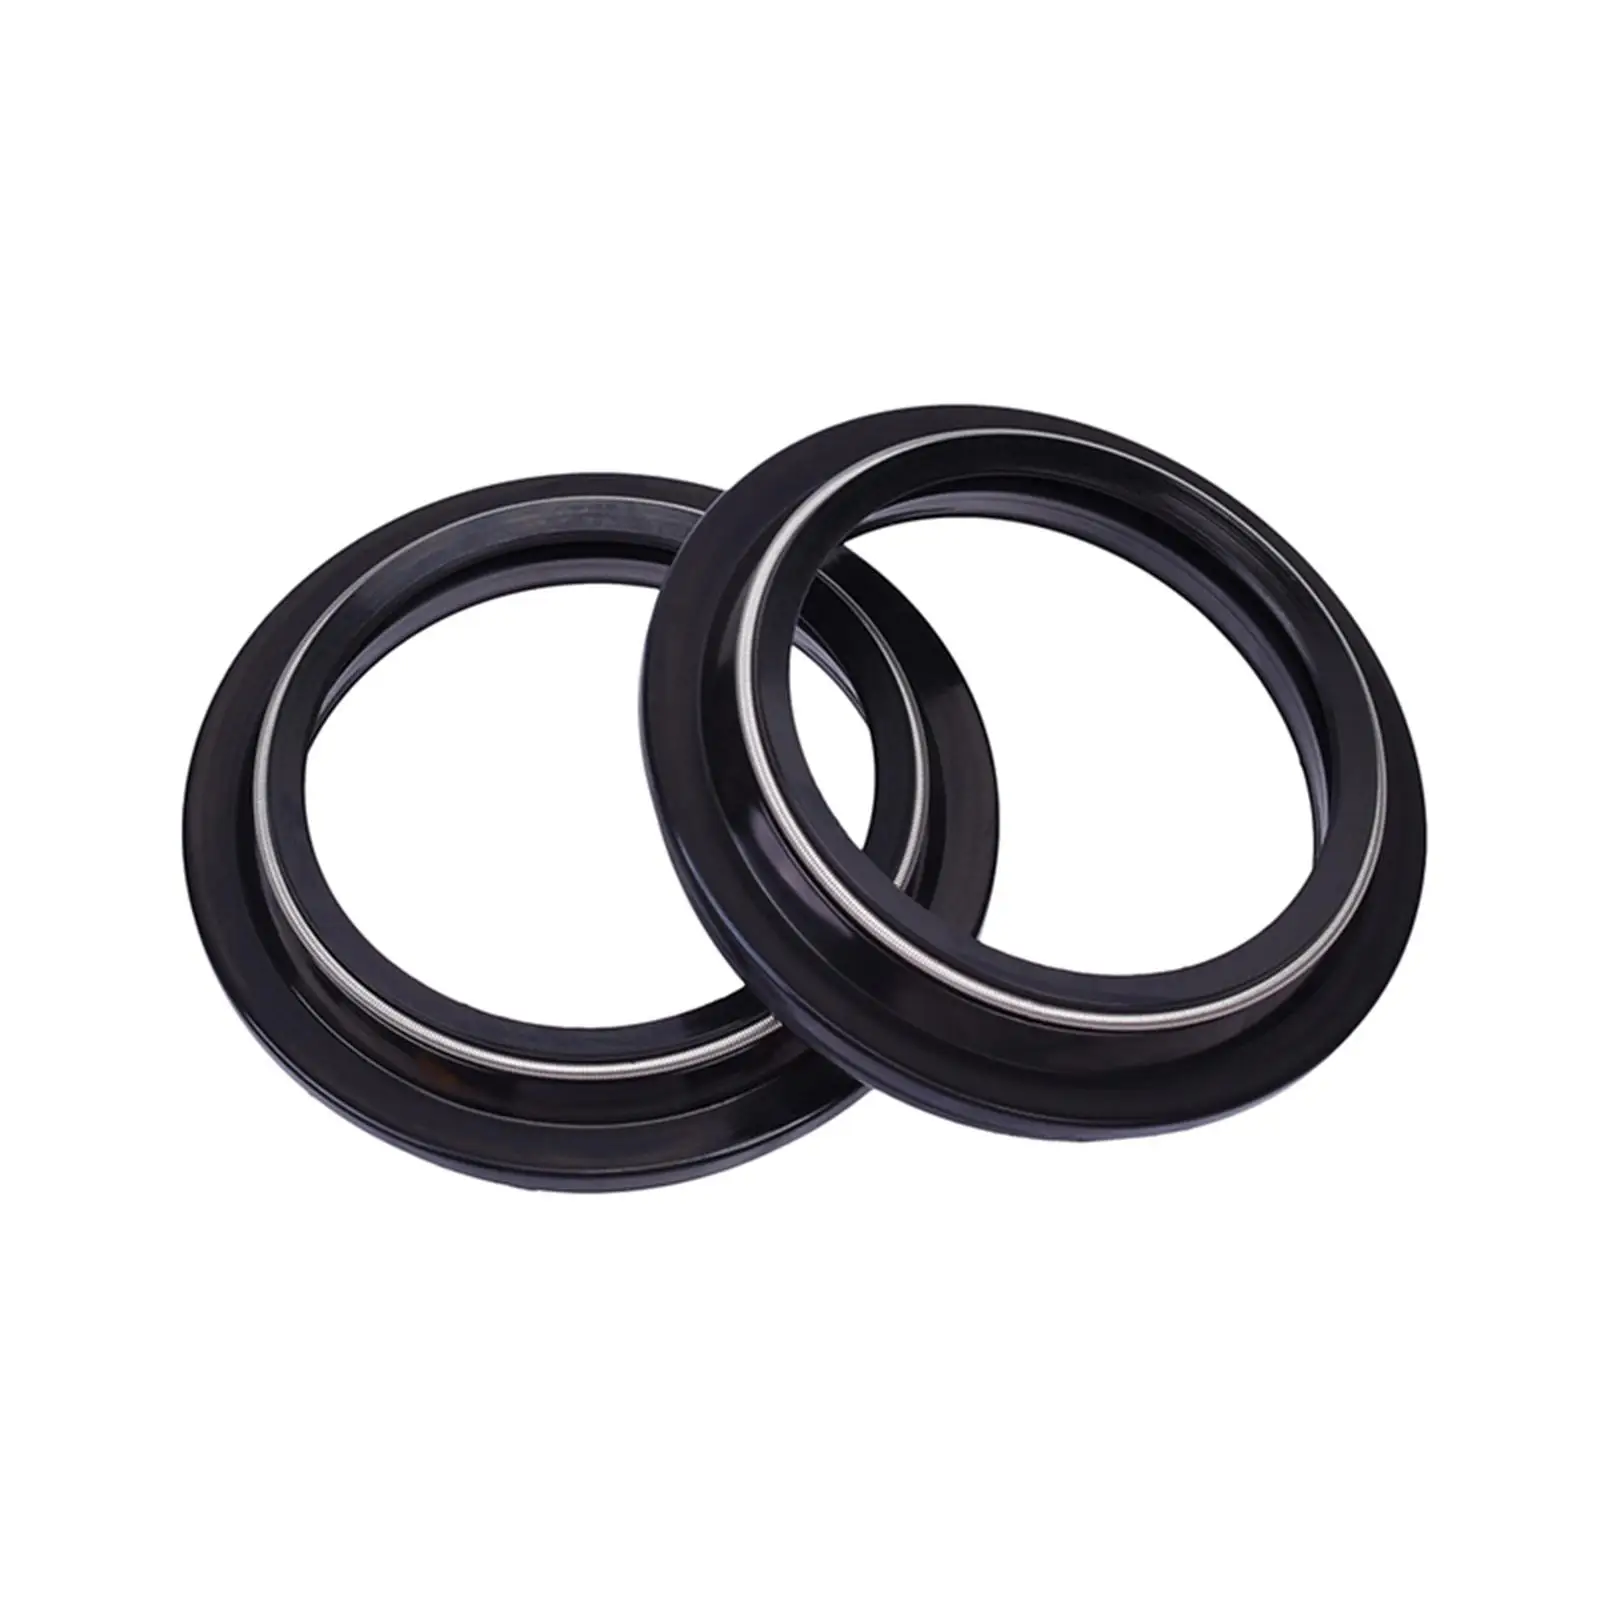 Front Fork Shock Oil Seal and Dust Seal Set 47x58x11mm for Honda CR250R